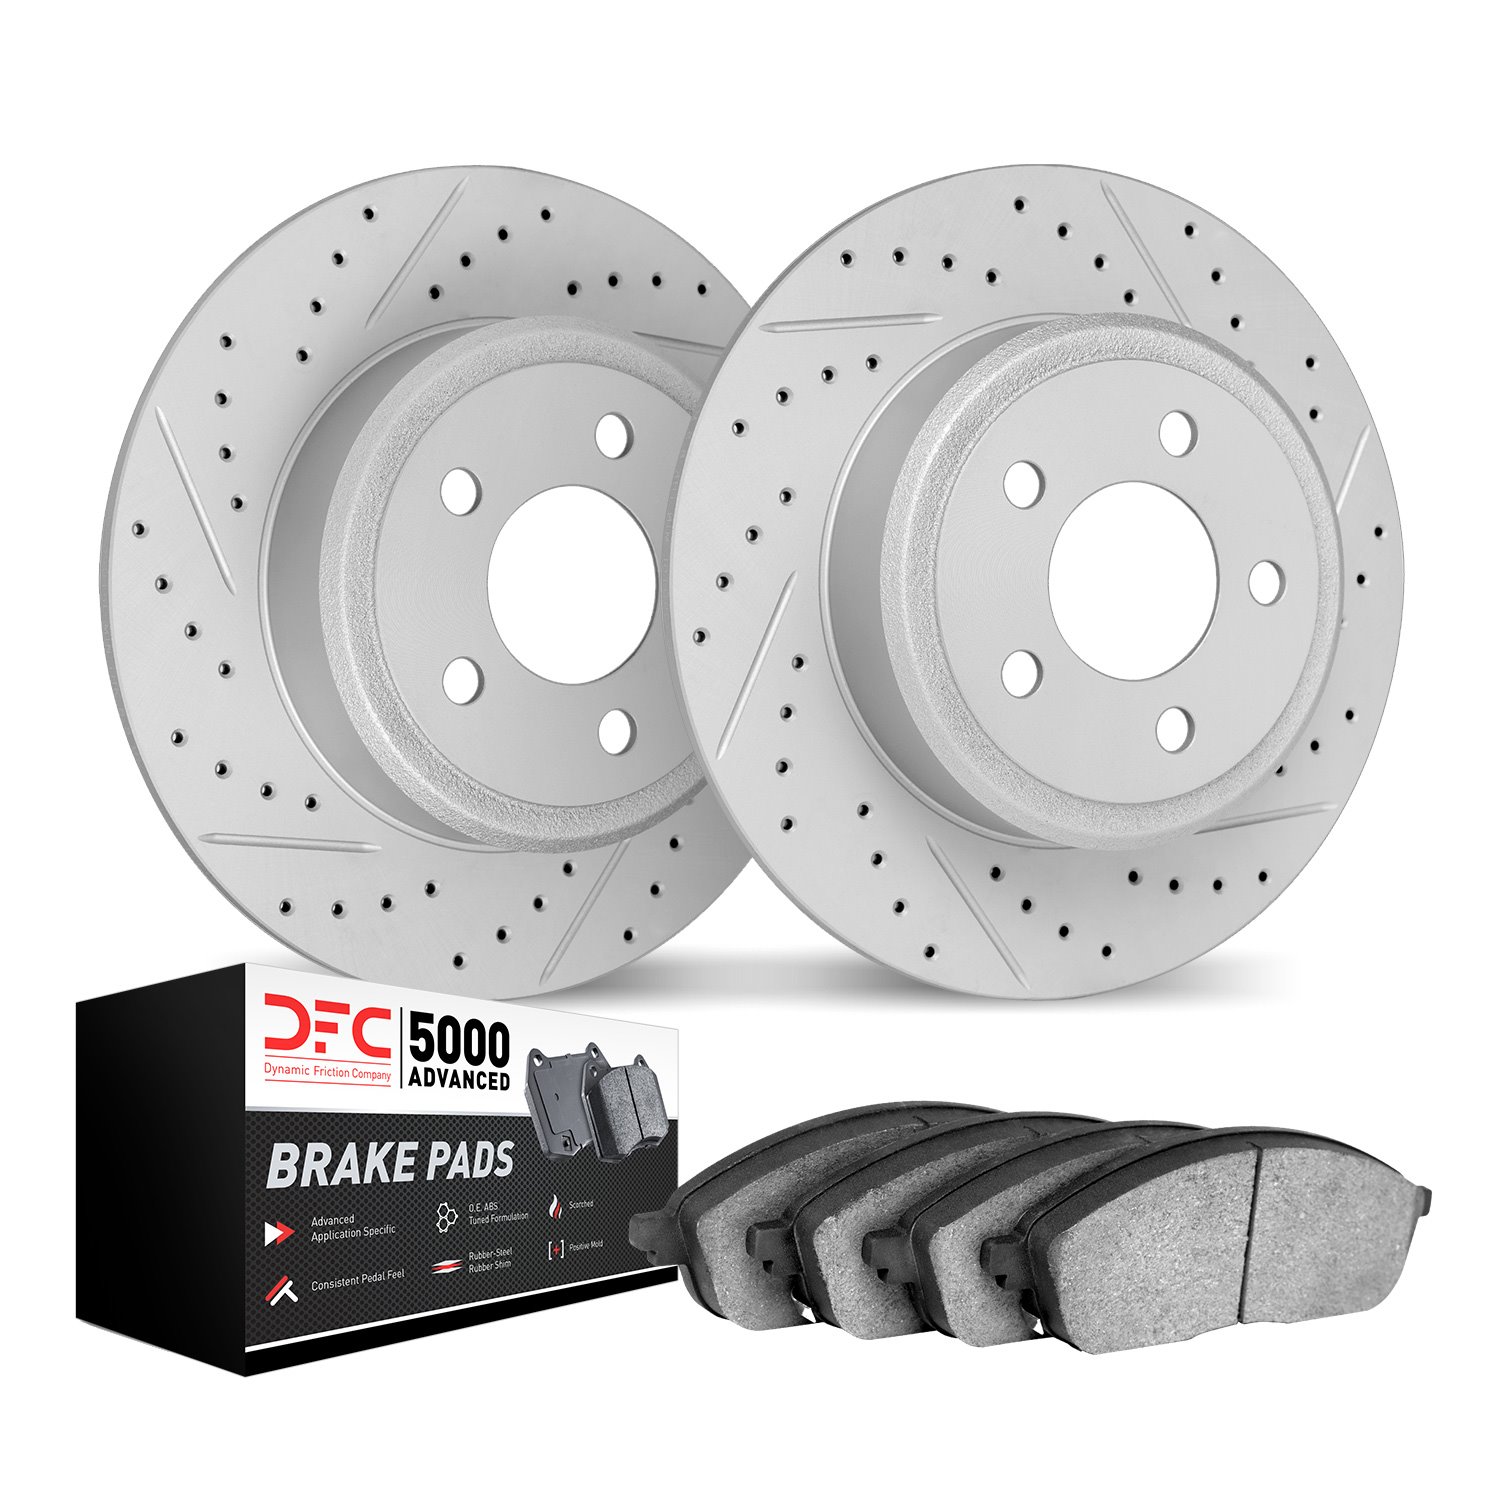 2502-11027 Geoperformance Drilled/Slotted Rotors w/5000 Advanced Brake Pads Kit, 2009-2010 Ford/Lincoln/Mercury/Mazda, Position: